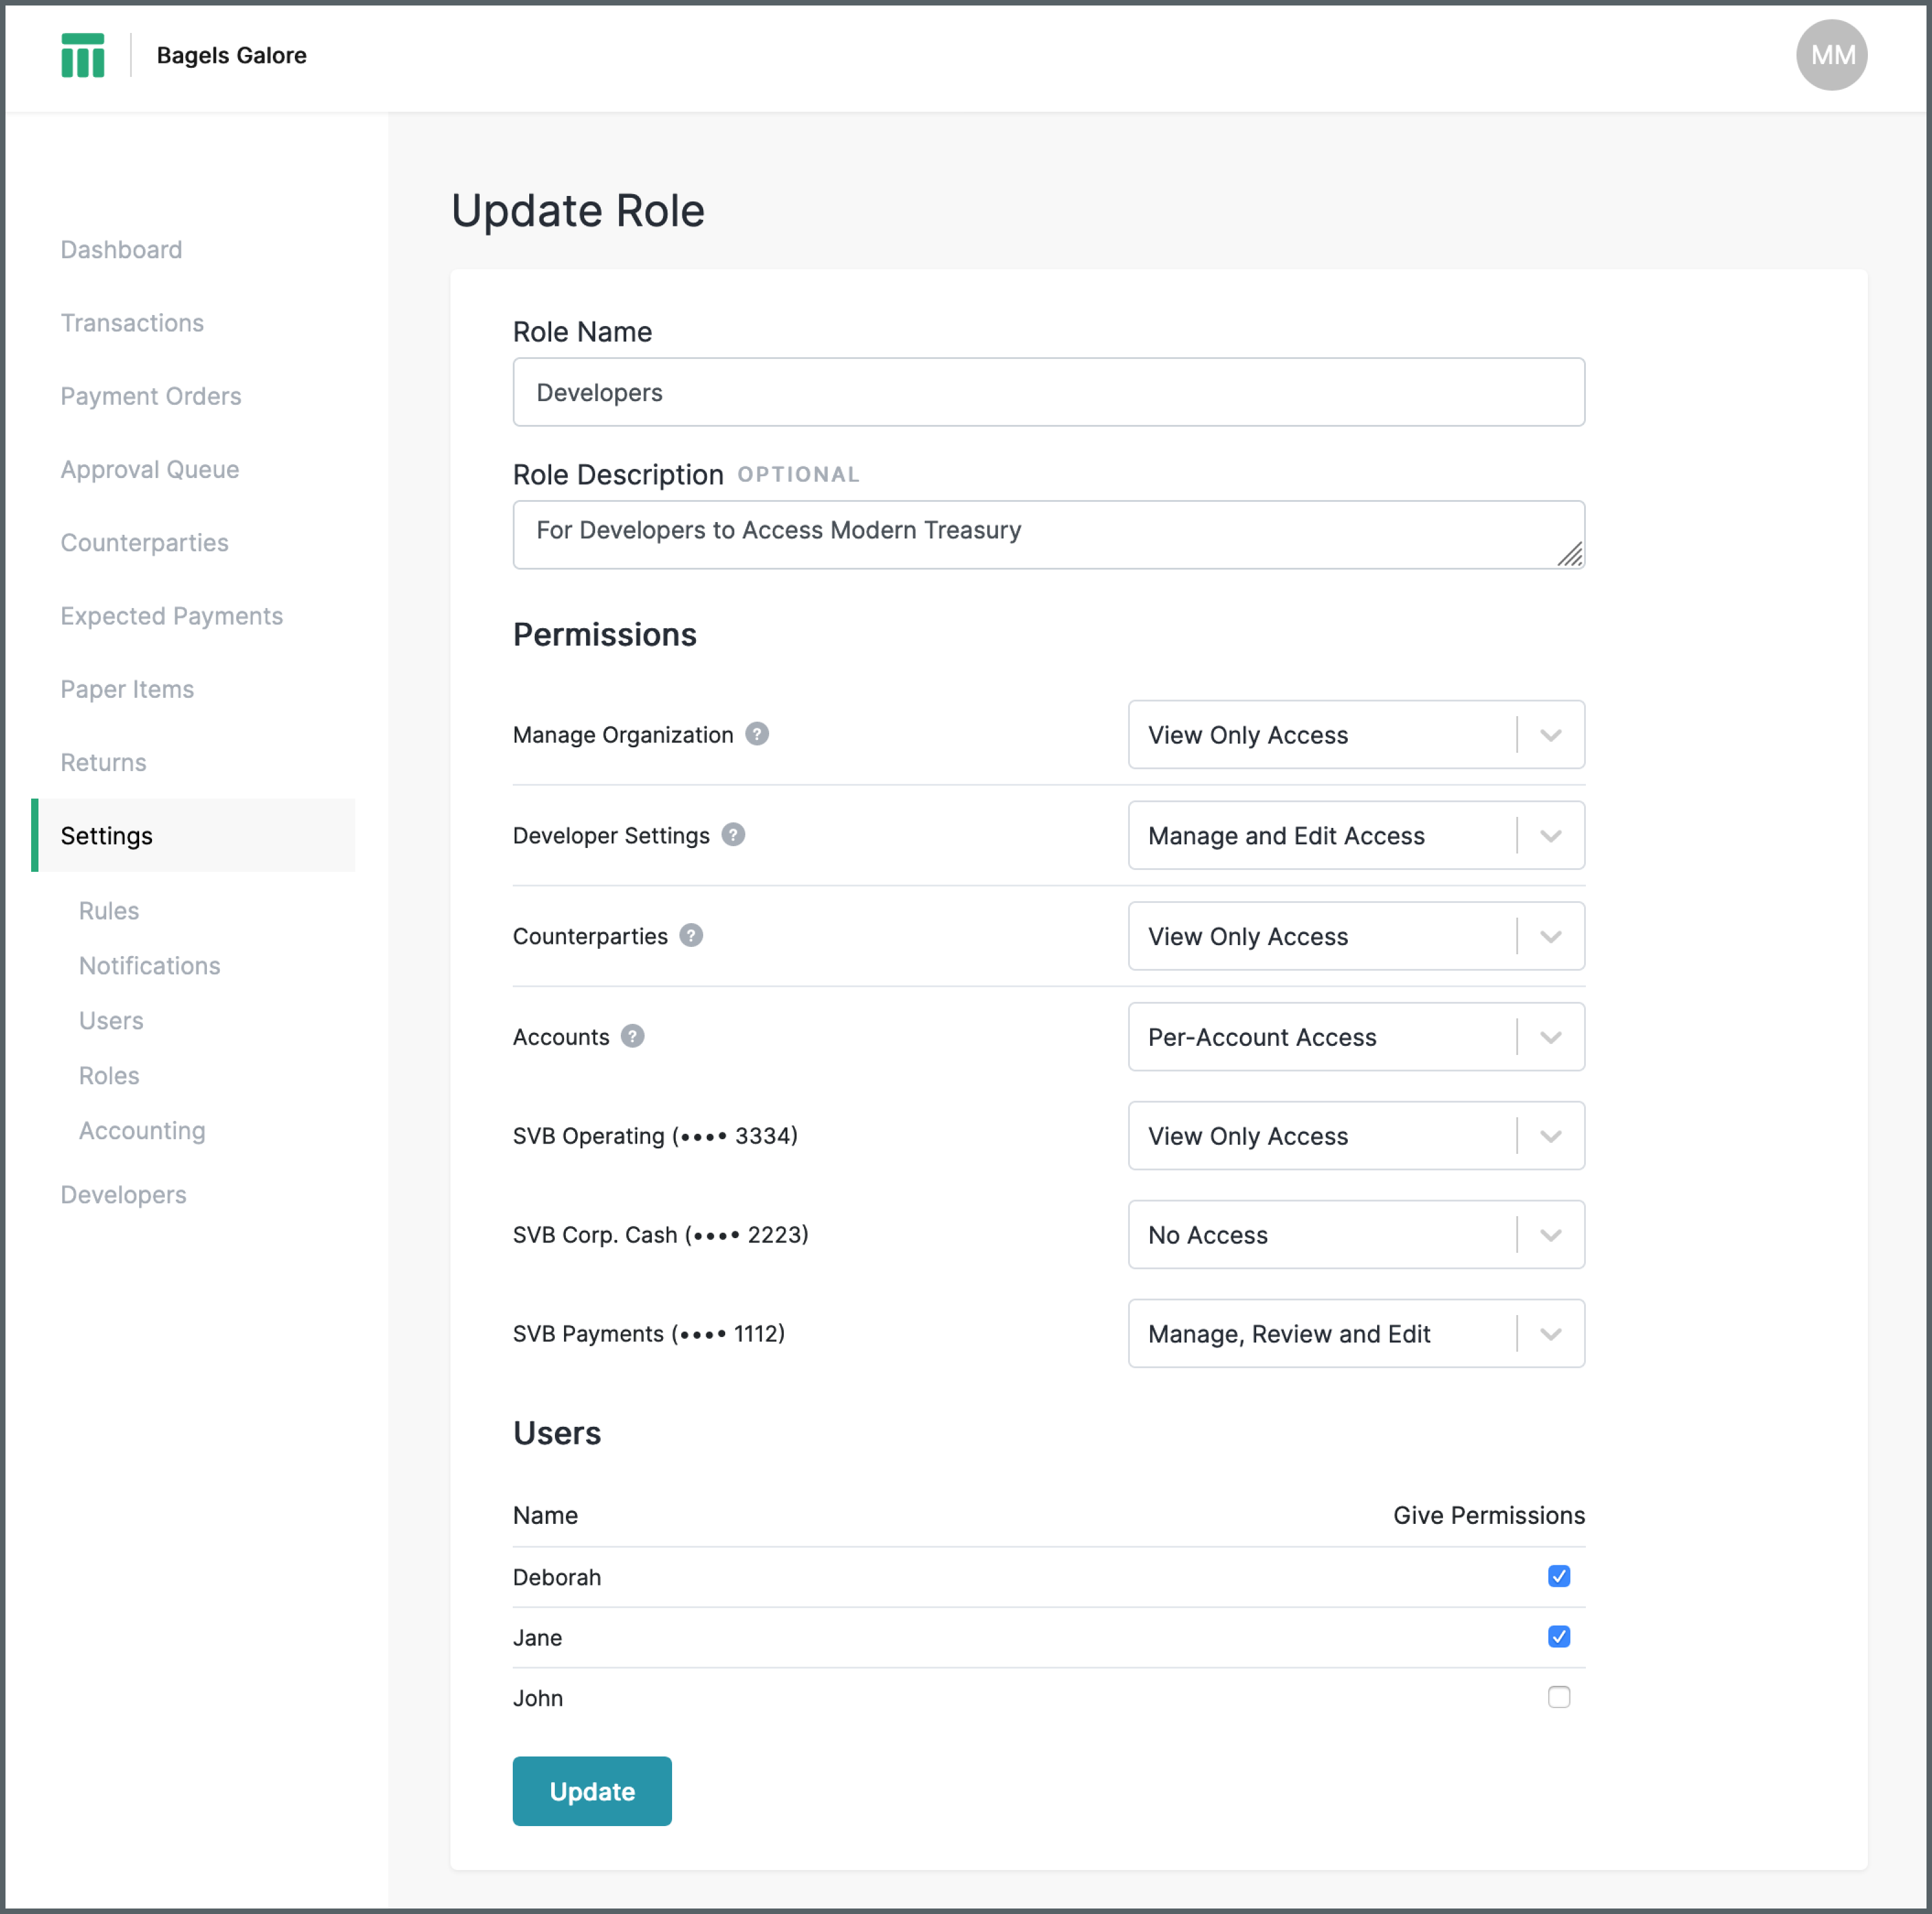 Web app screen: Uddate Role (more options)